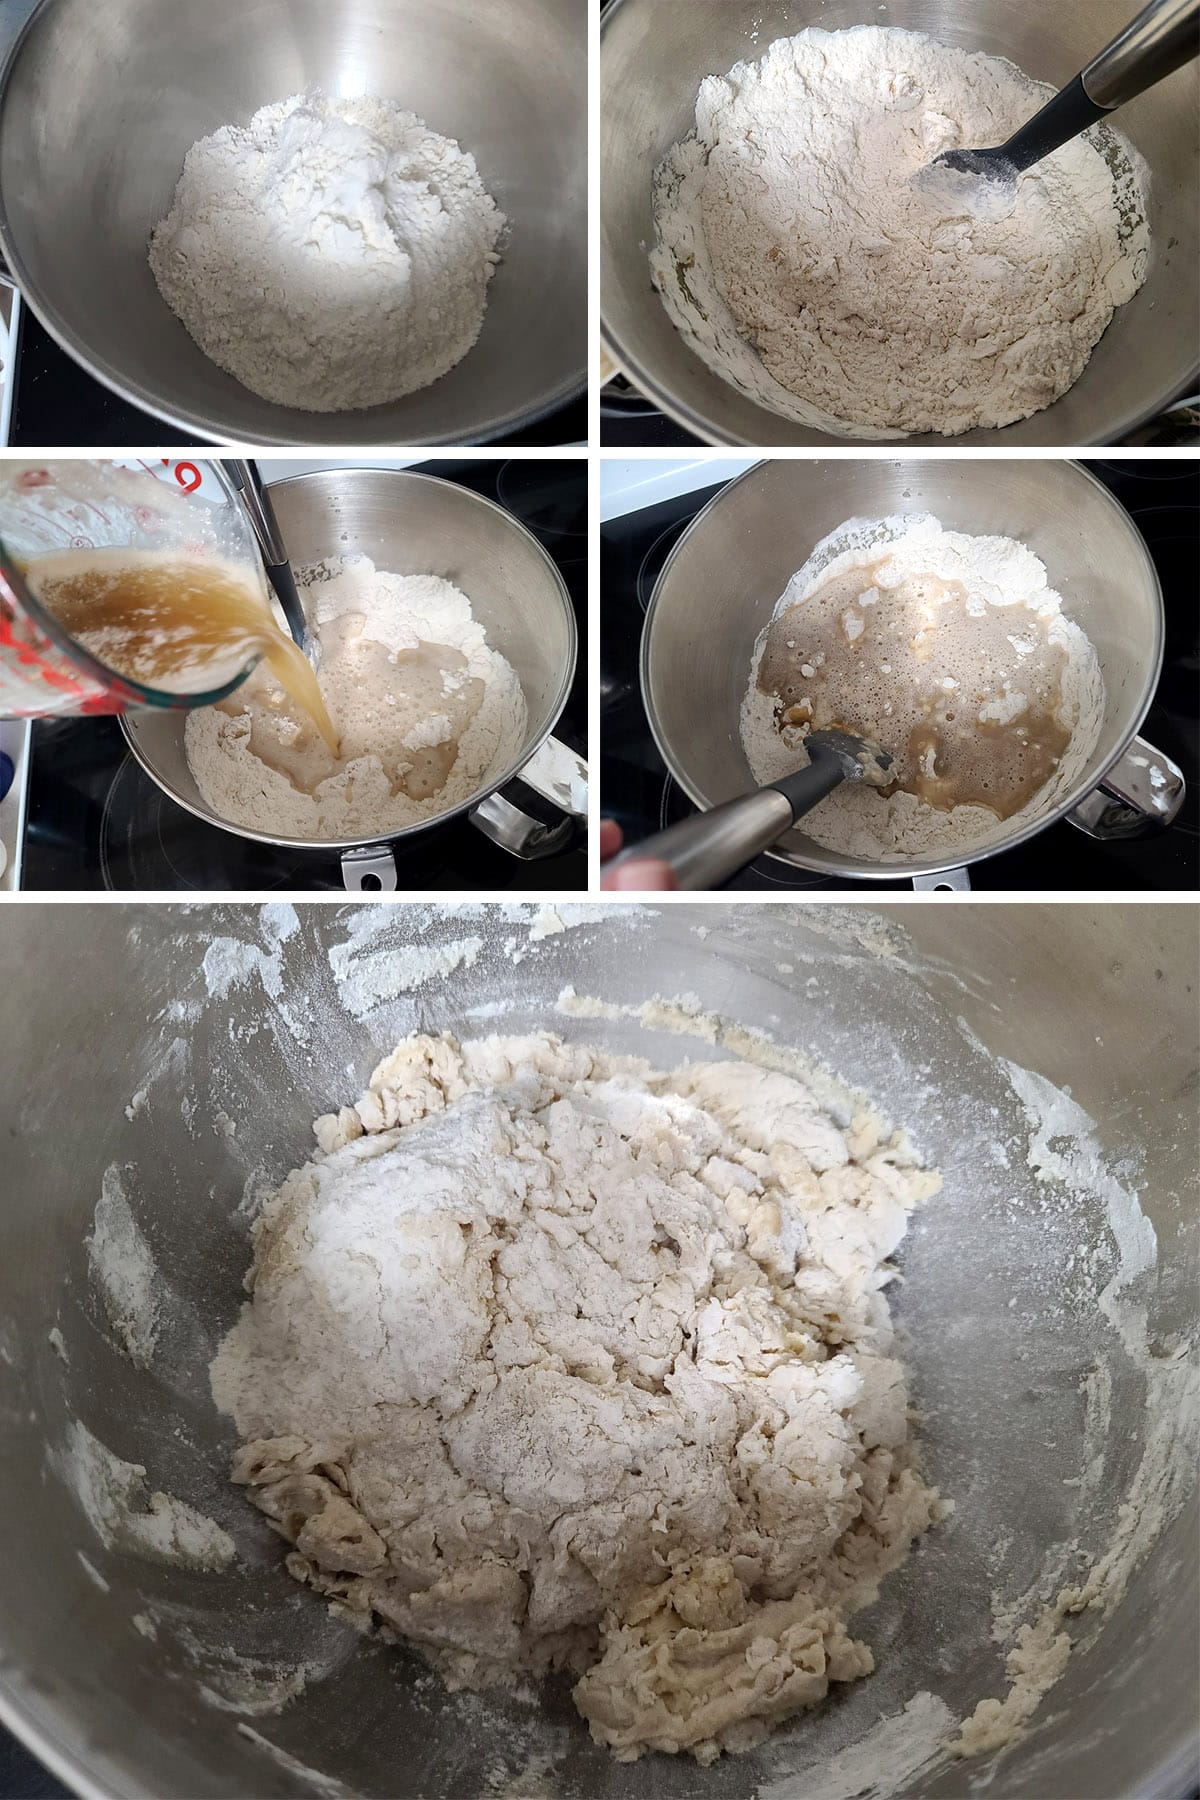 A 5 part image showing the pretzel dough ingredients being mixed together.